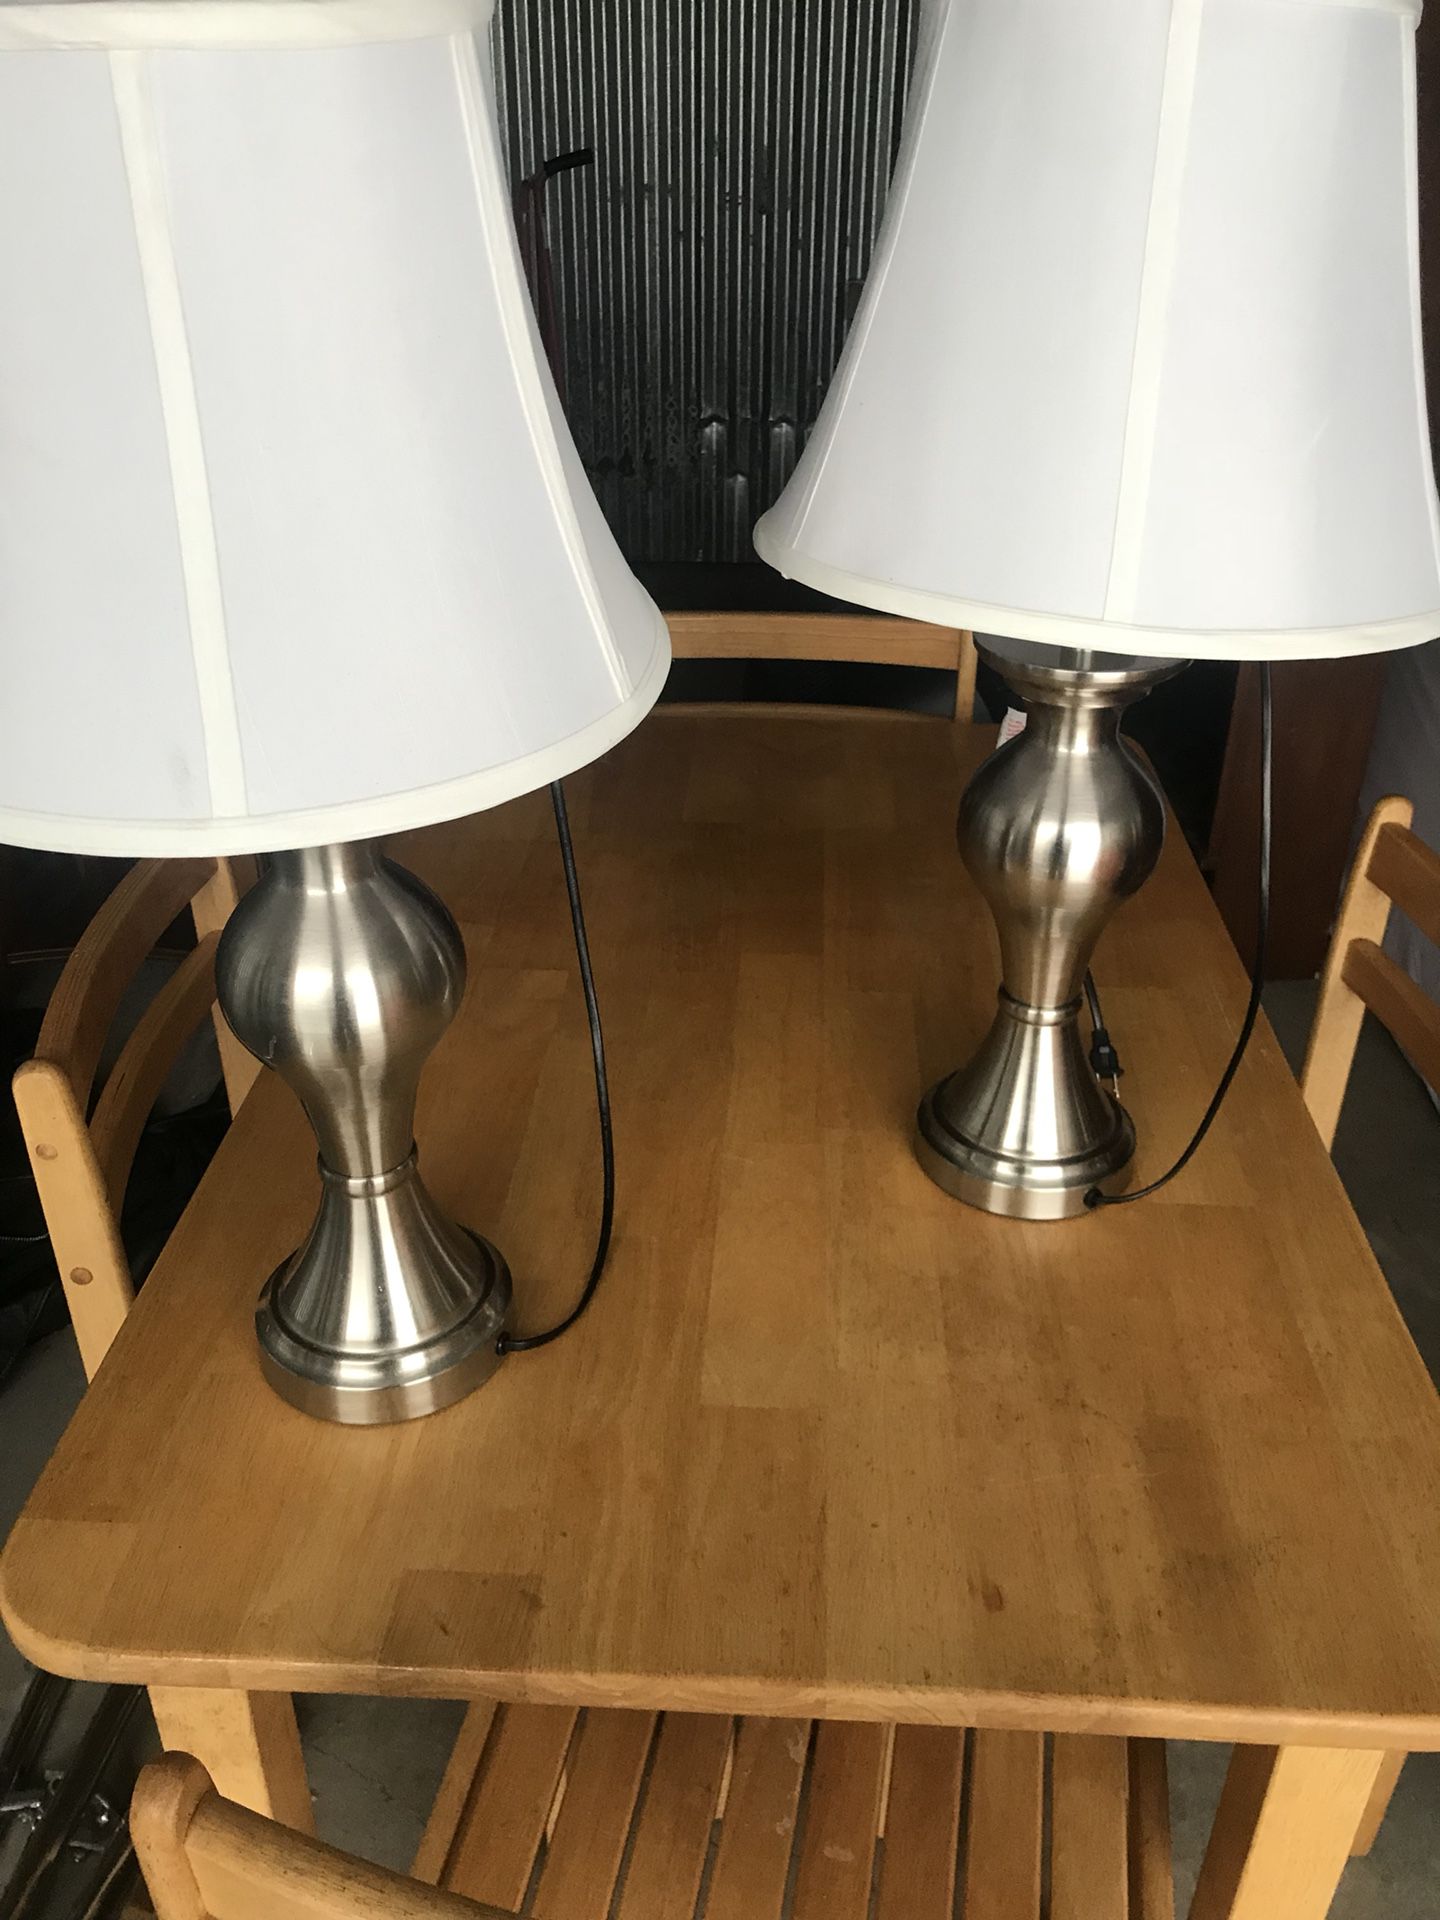 Matching silver lamps